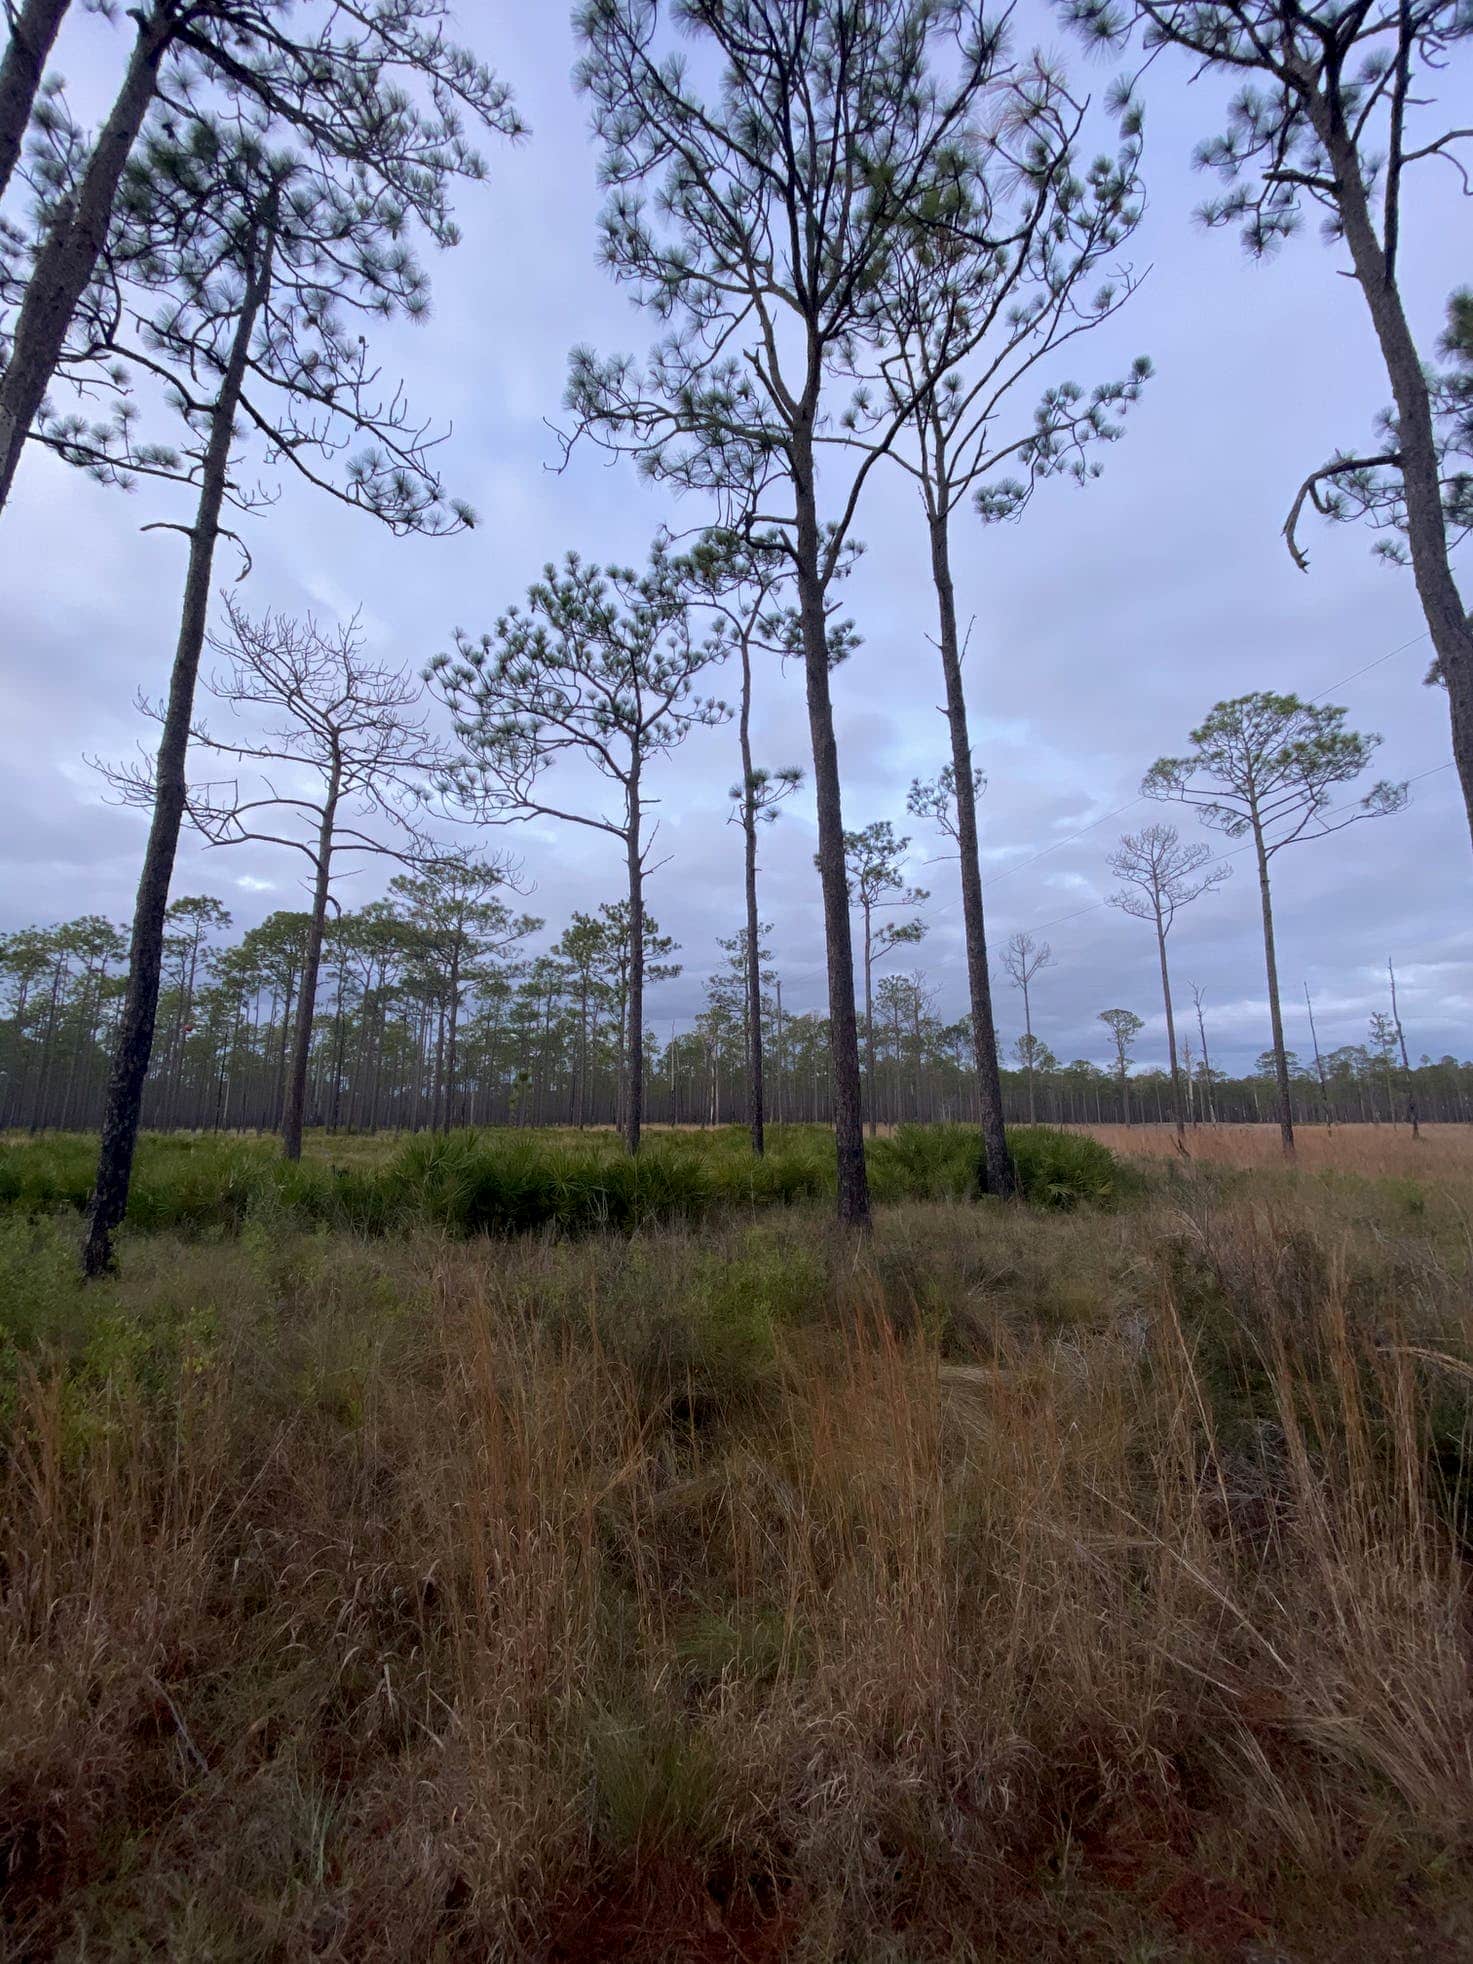 Florida marsh field with sparse trees and a stormy sky above.